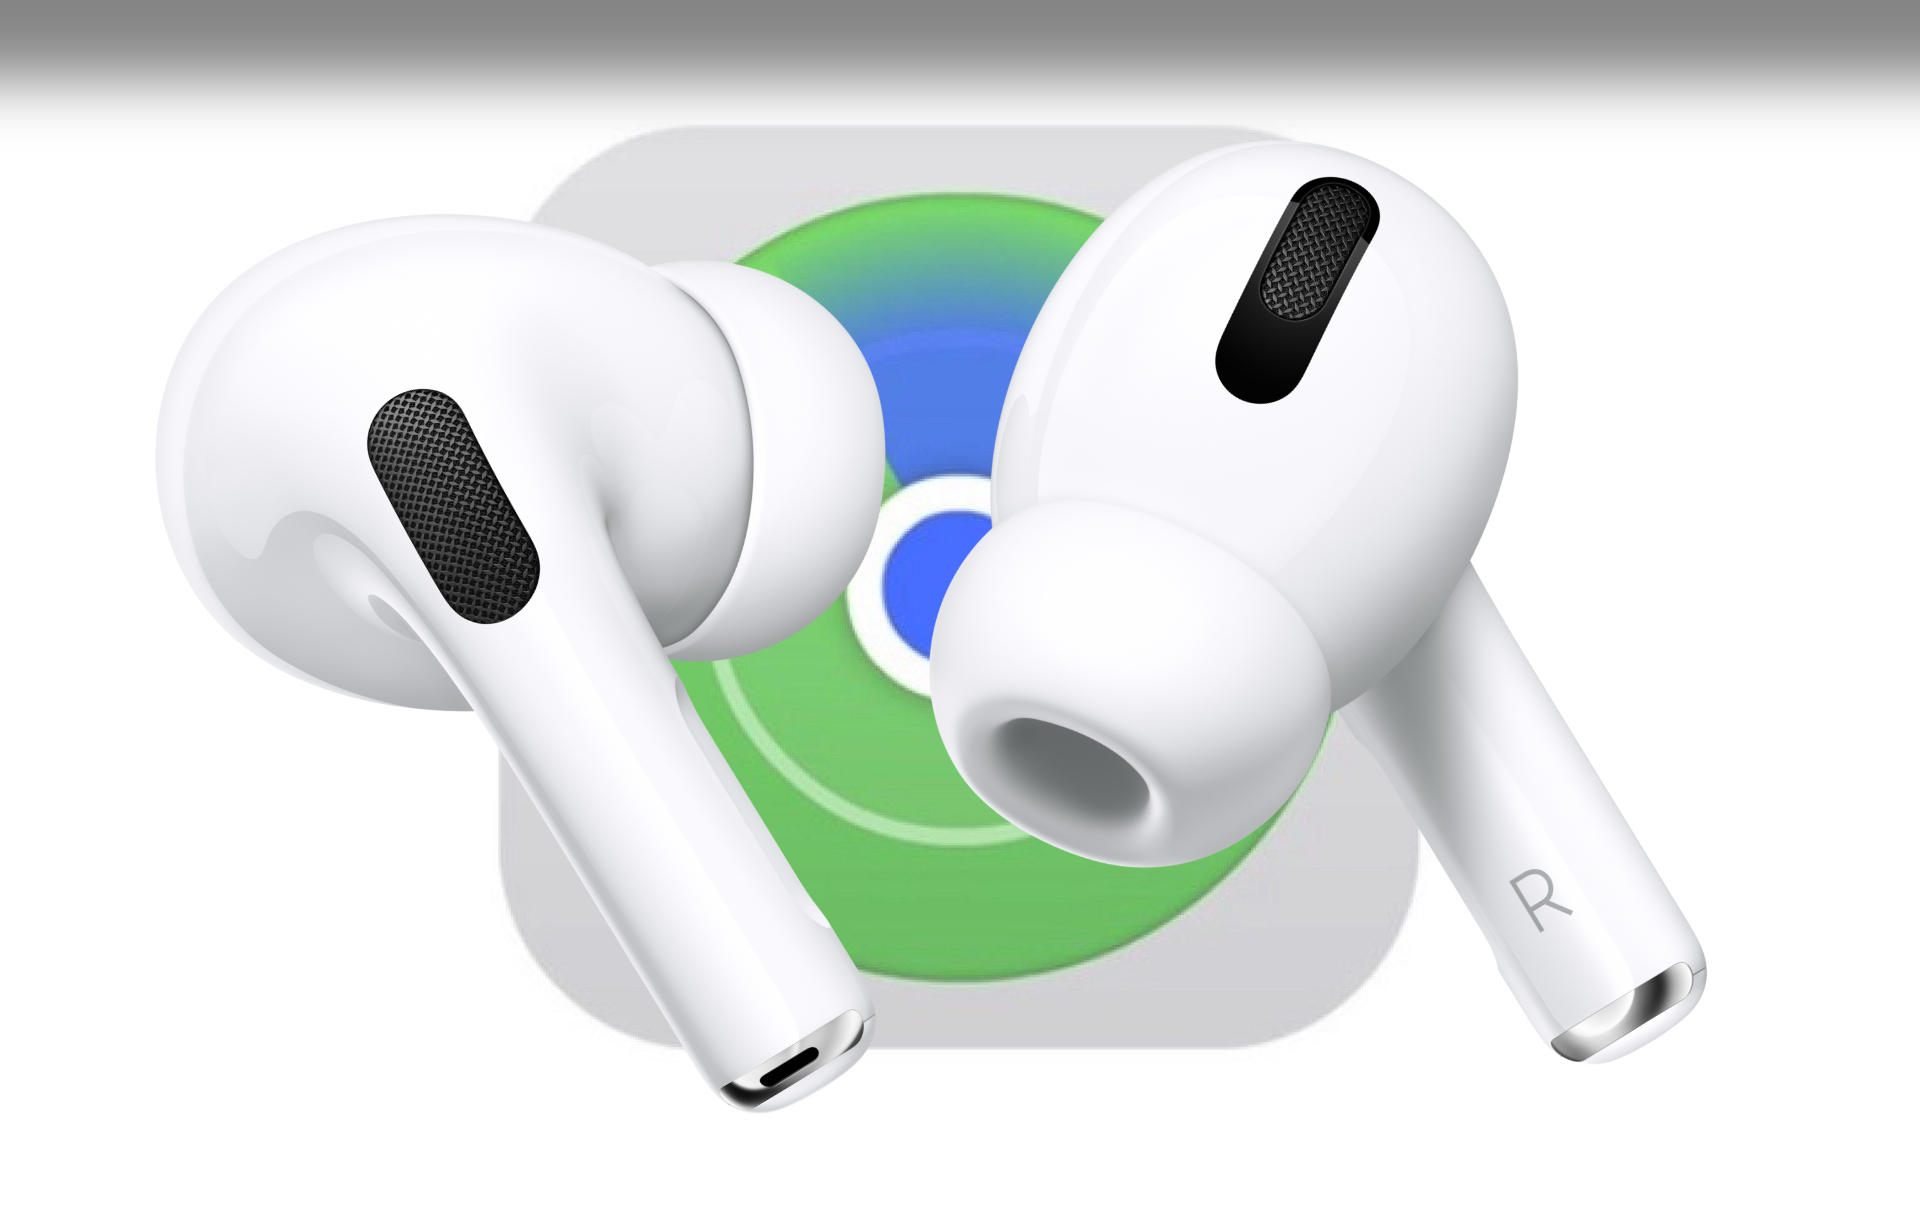 Apple Updates AirPods 2, AirPods and AirPods Max to Version 4A400 - Adds Updated 'Find My' Integration